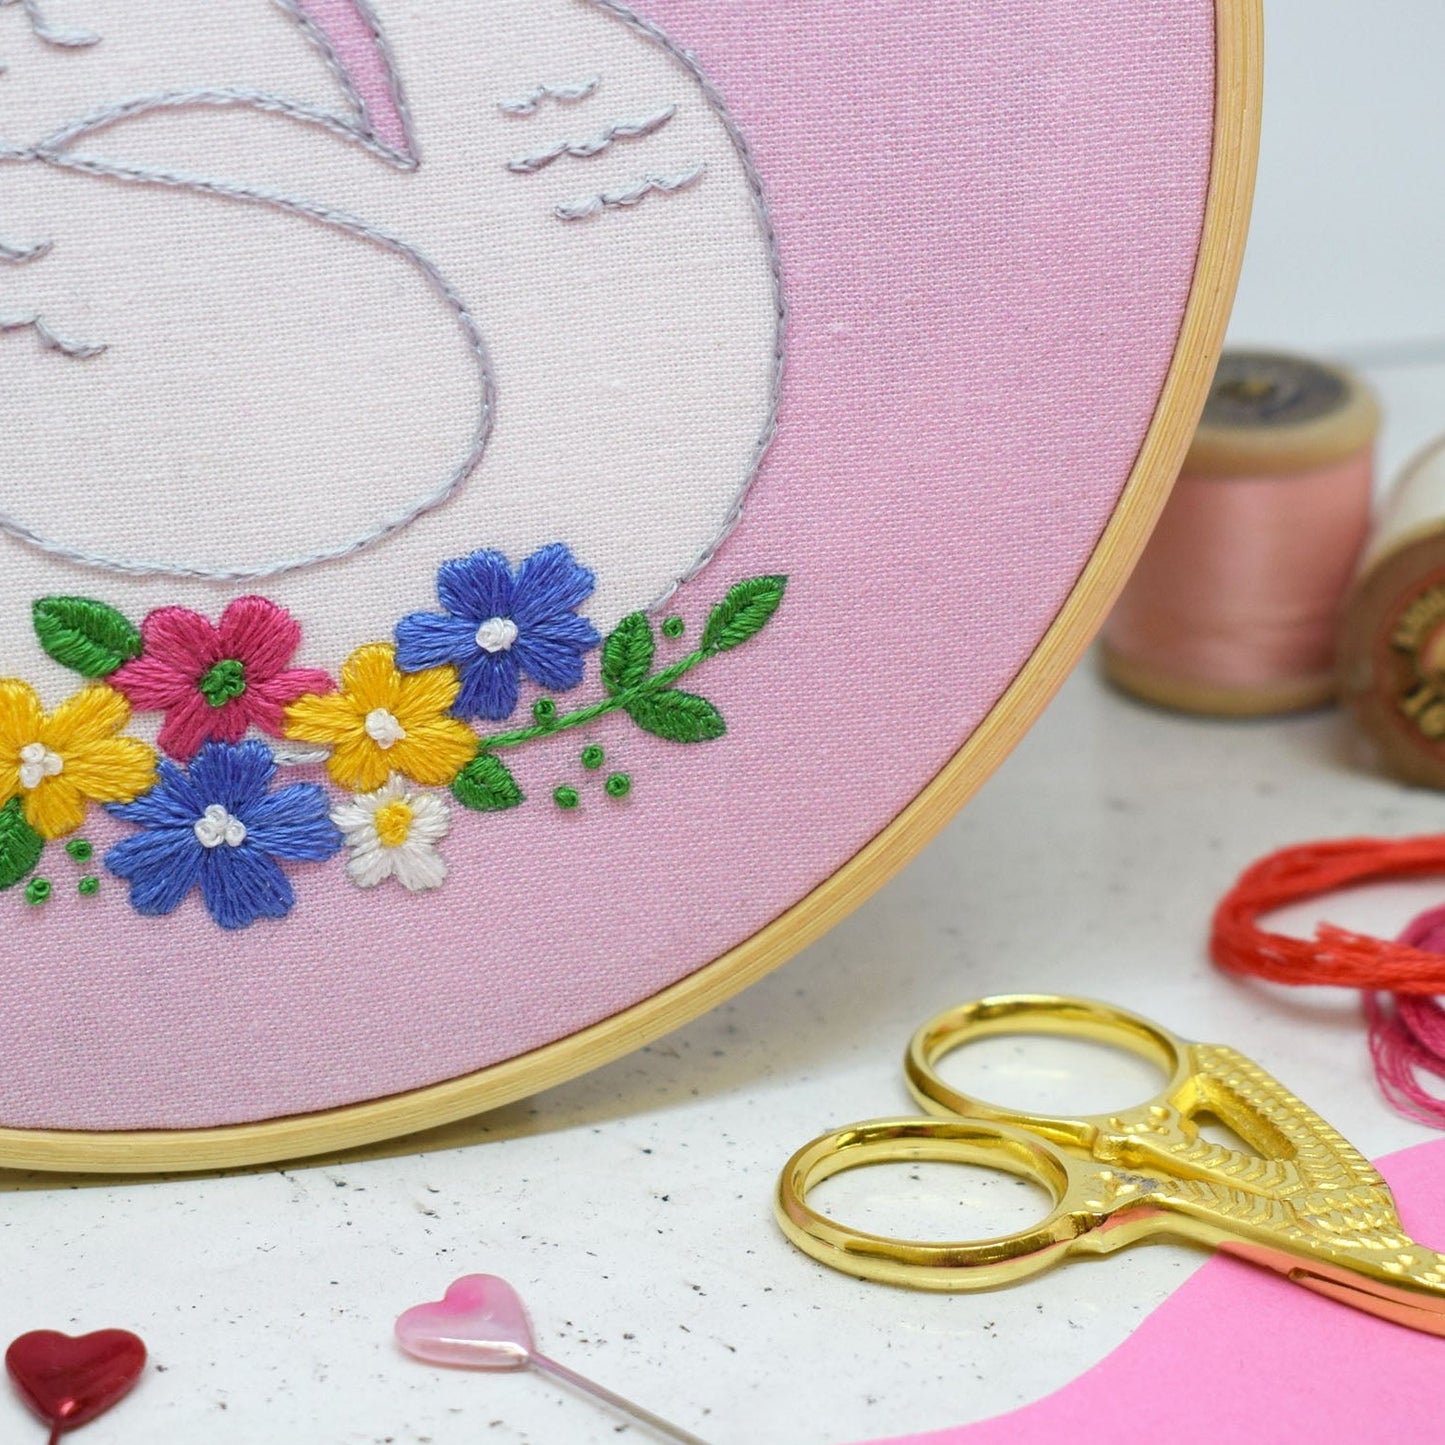 'Swan' Large Embroidery Kit